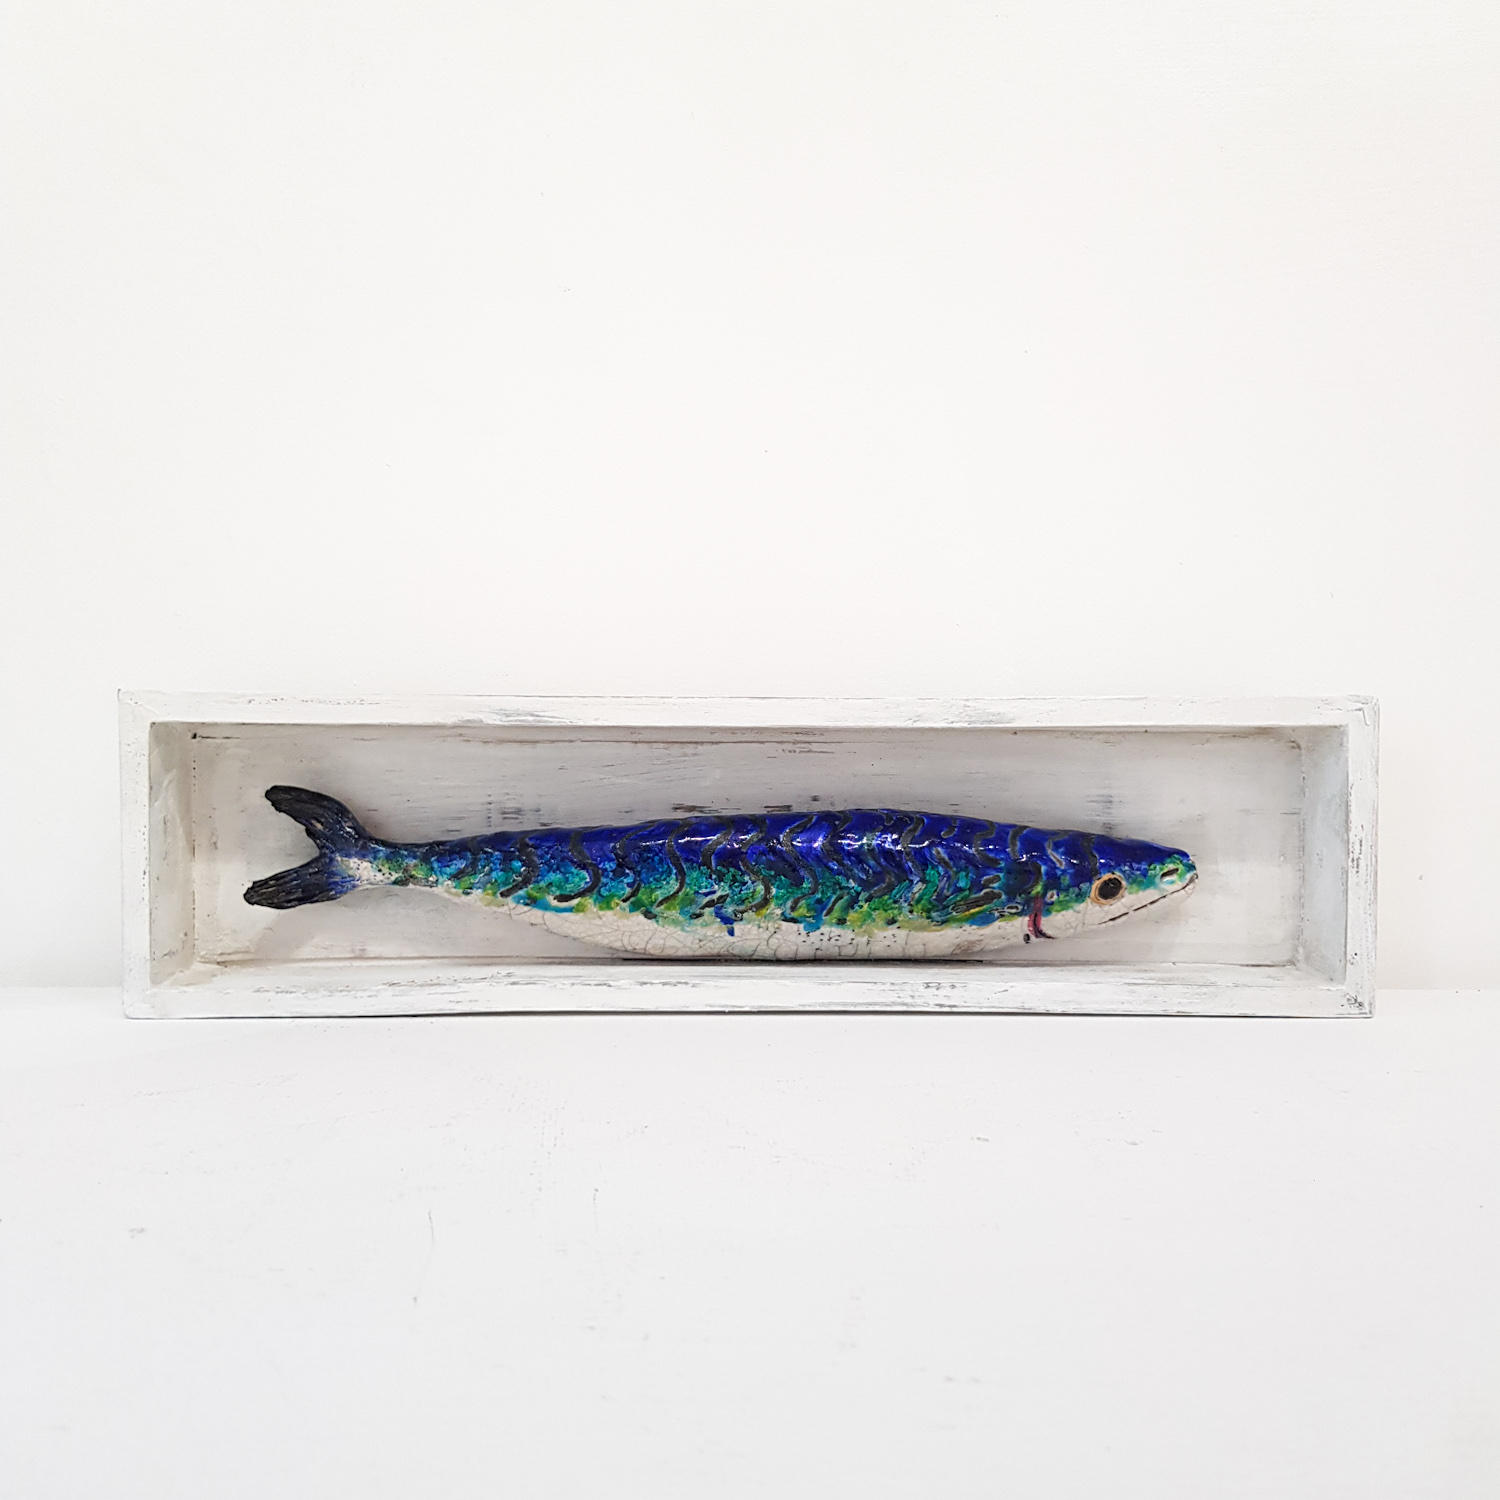 'The Pantry: Mackerel' by artist Diana Tonnison